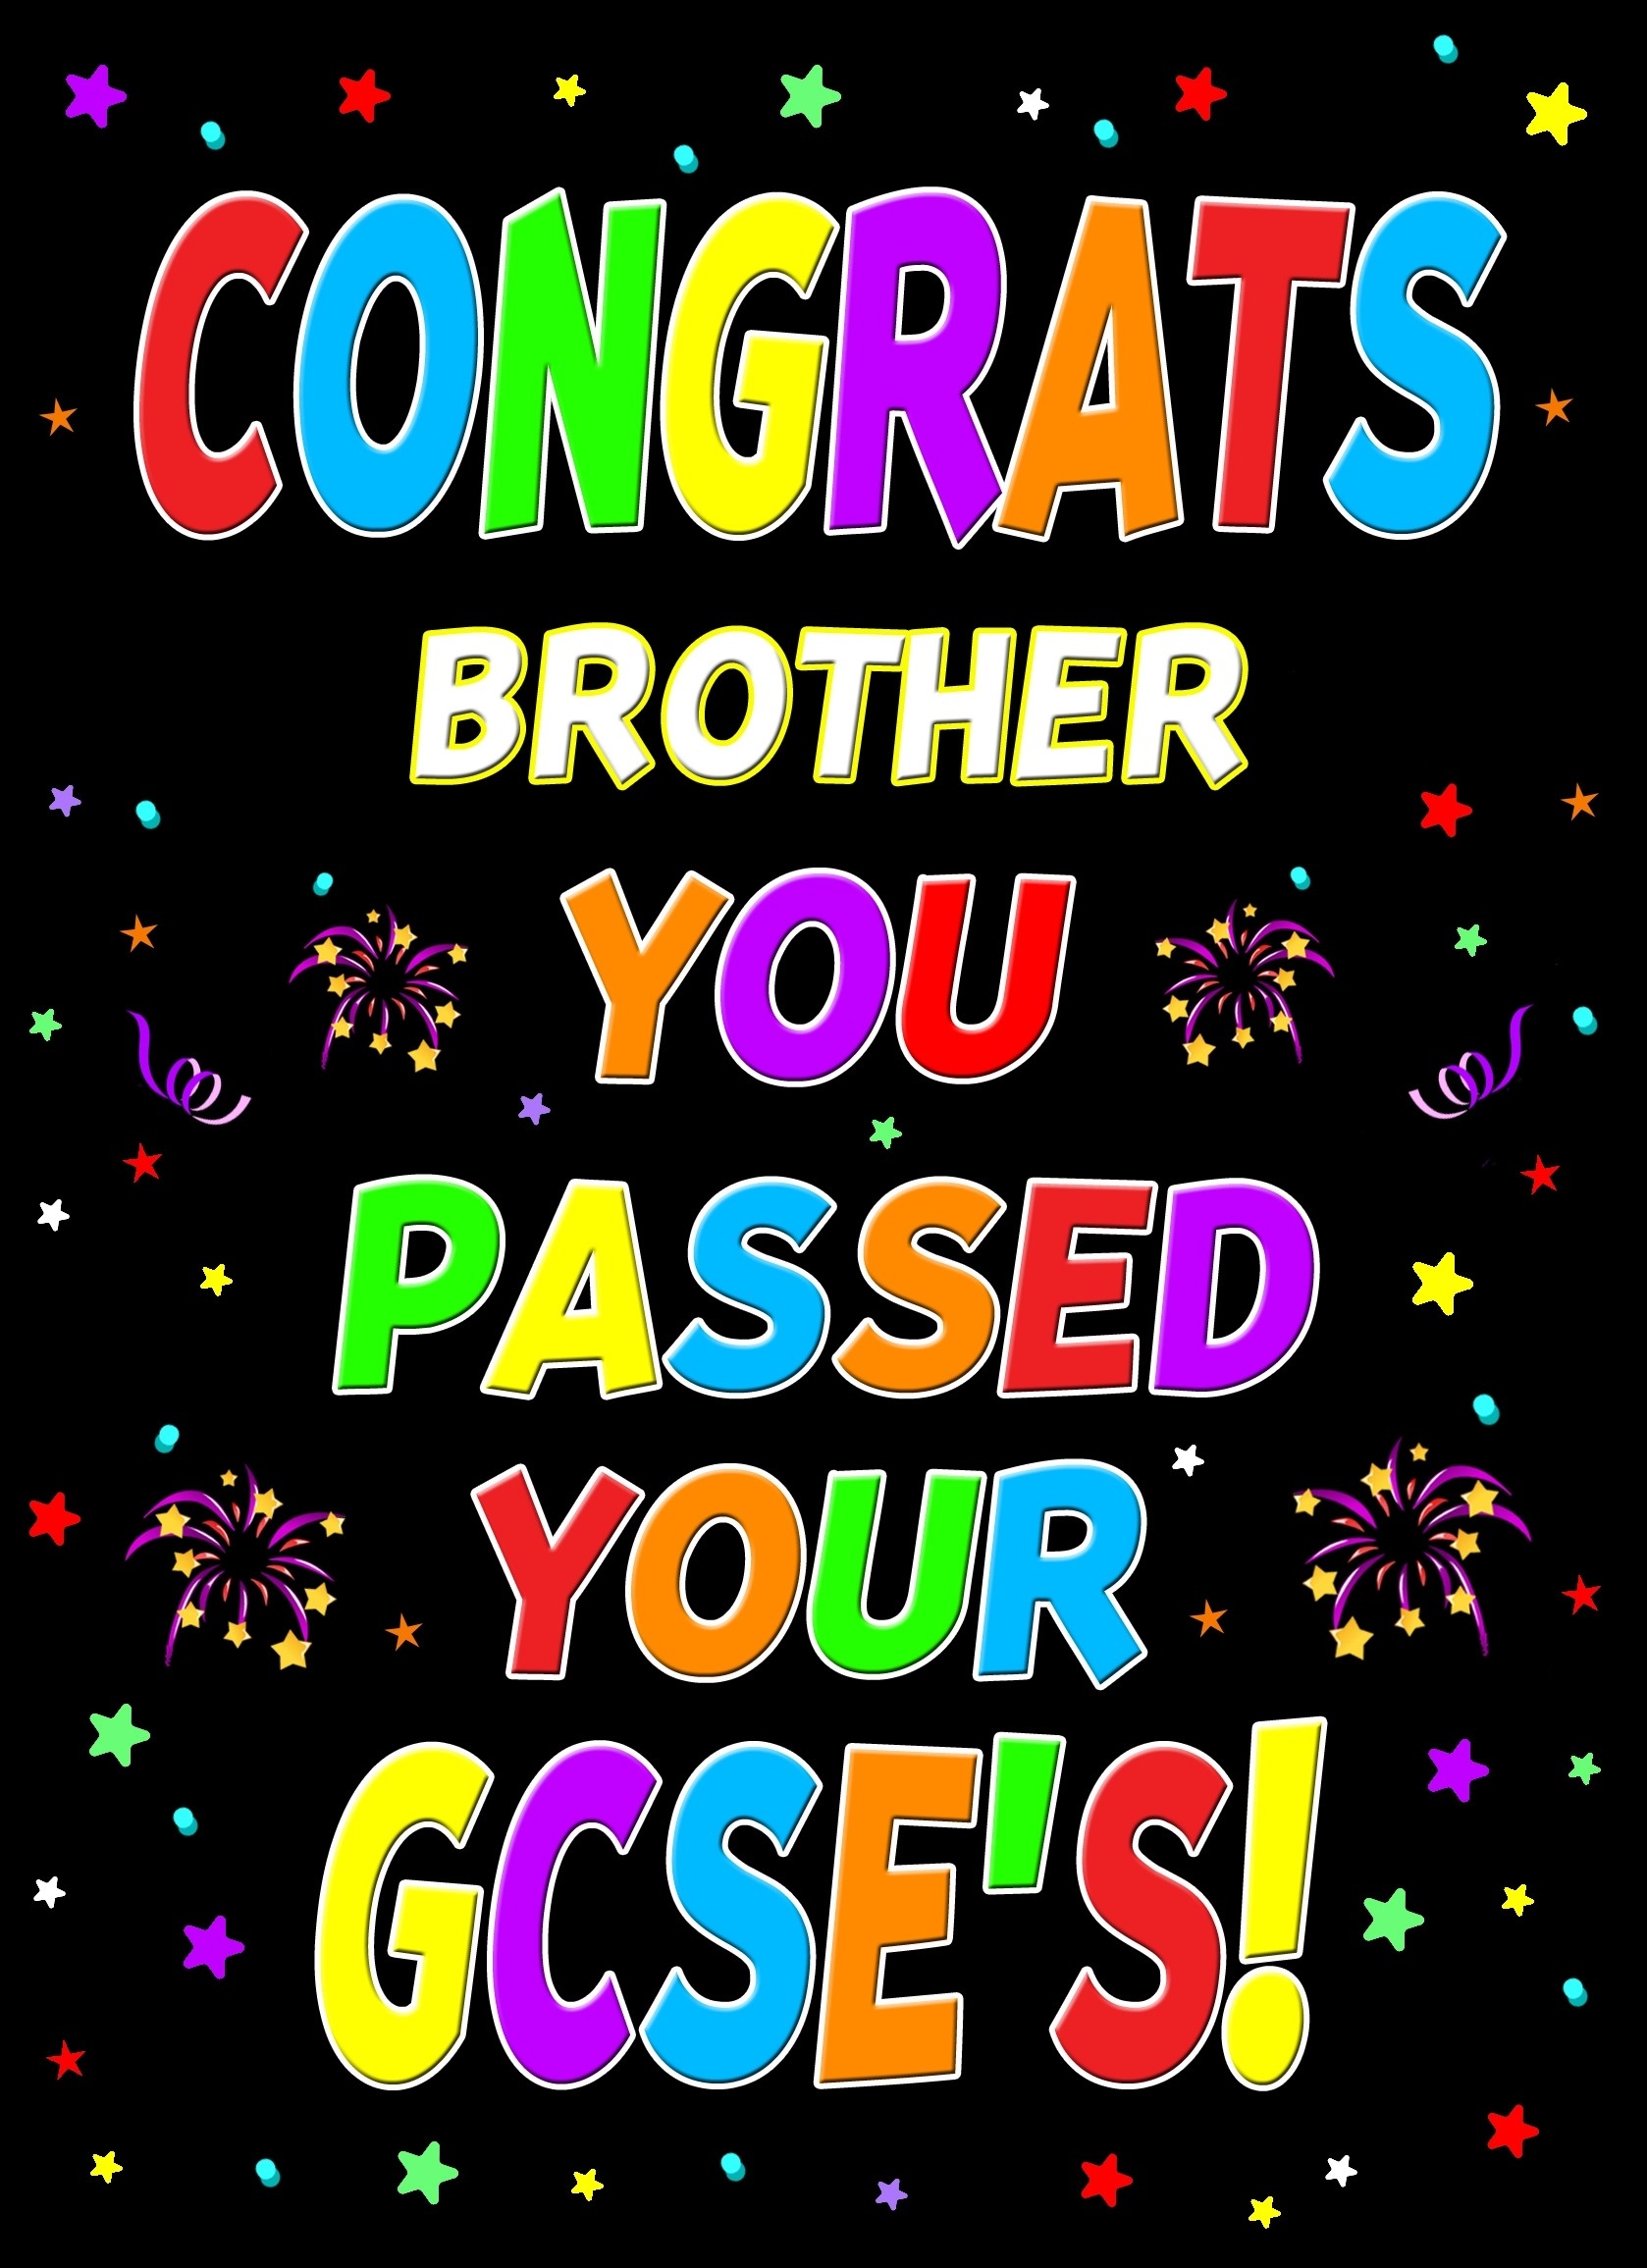 Congratulations GCSE Passing Exams Card For Brother (Design 1)